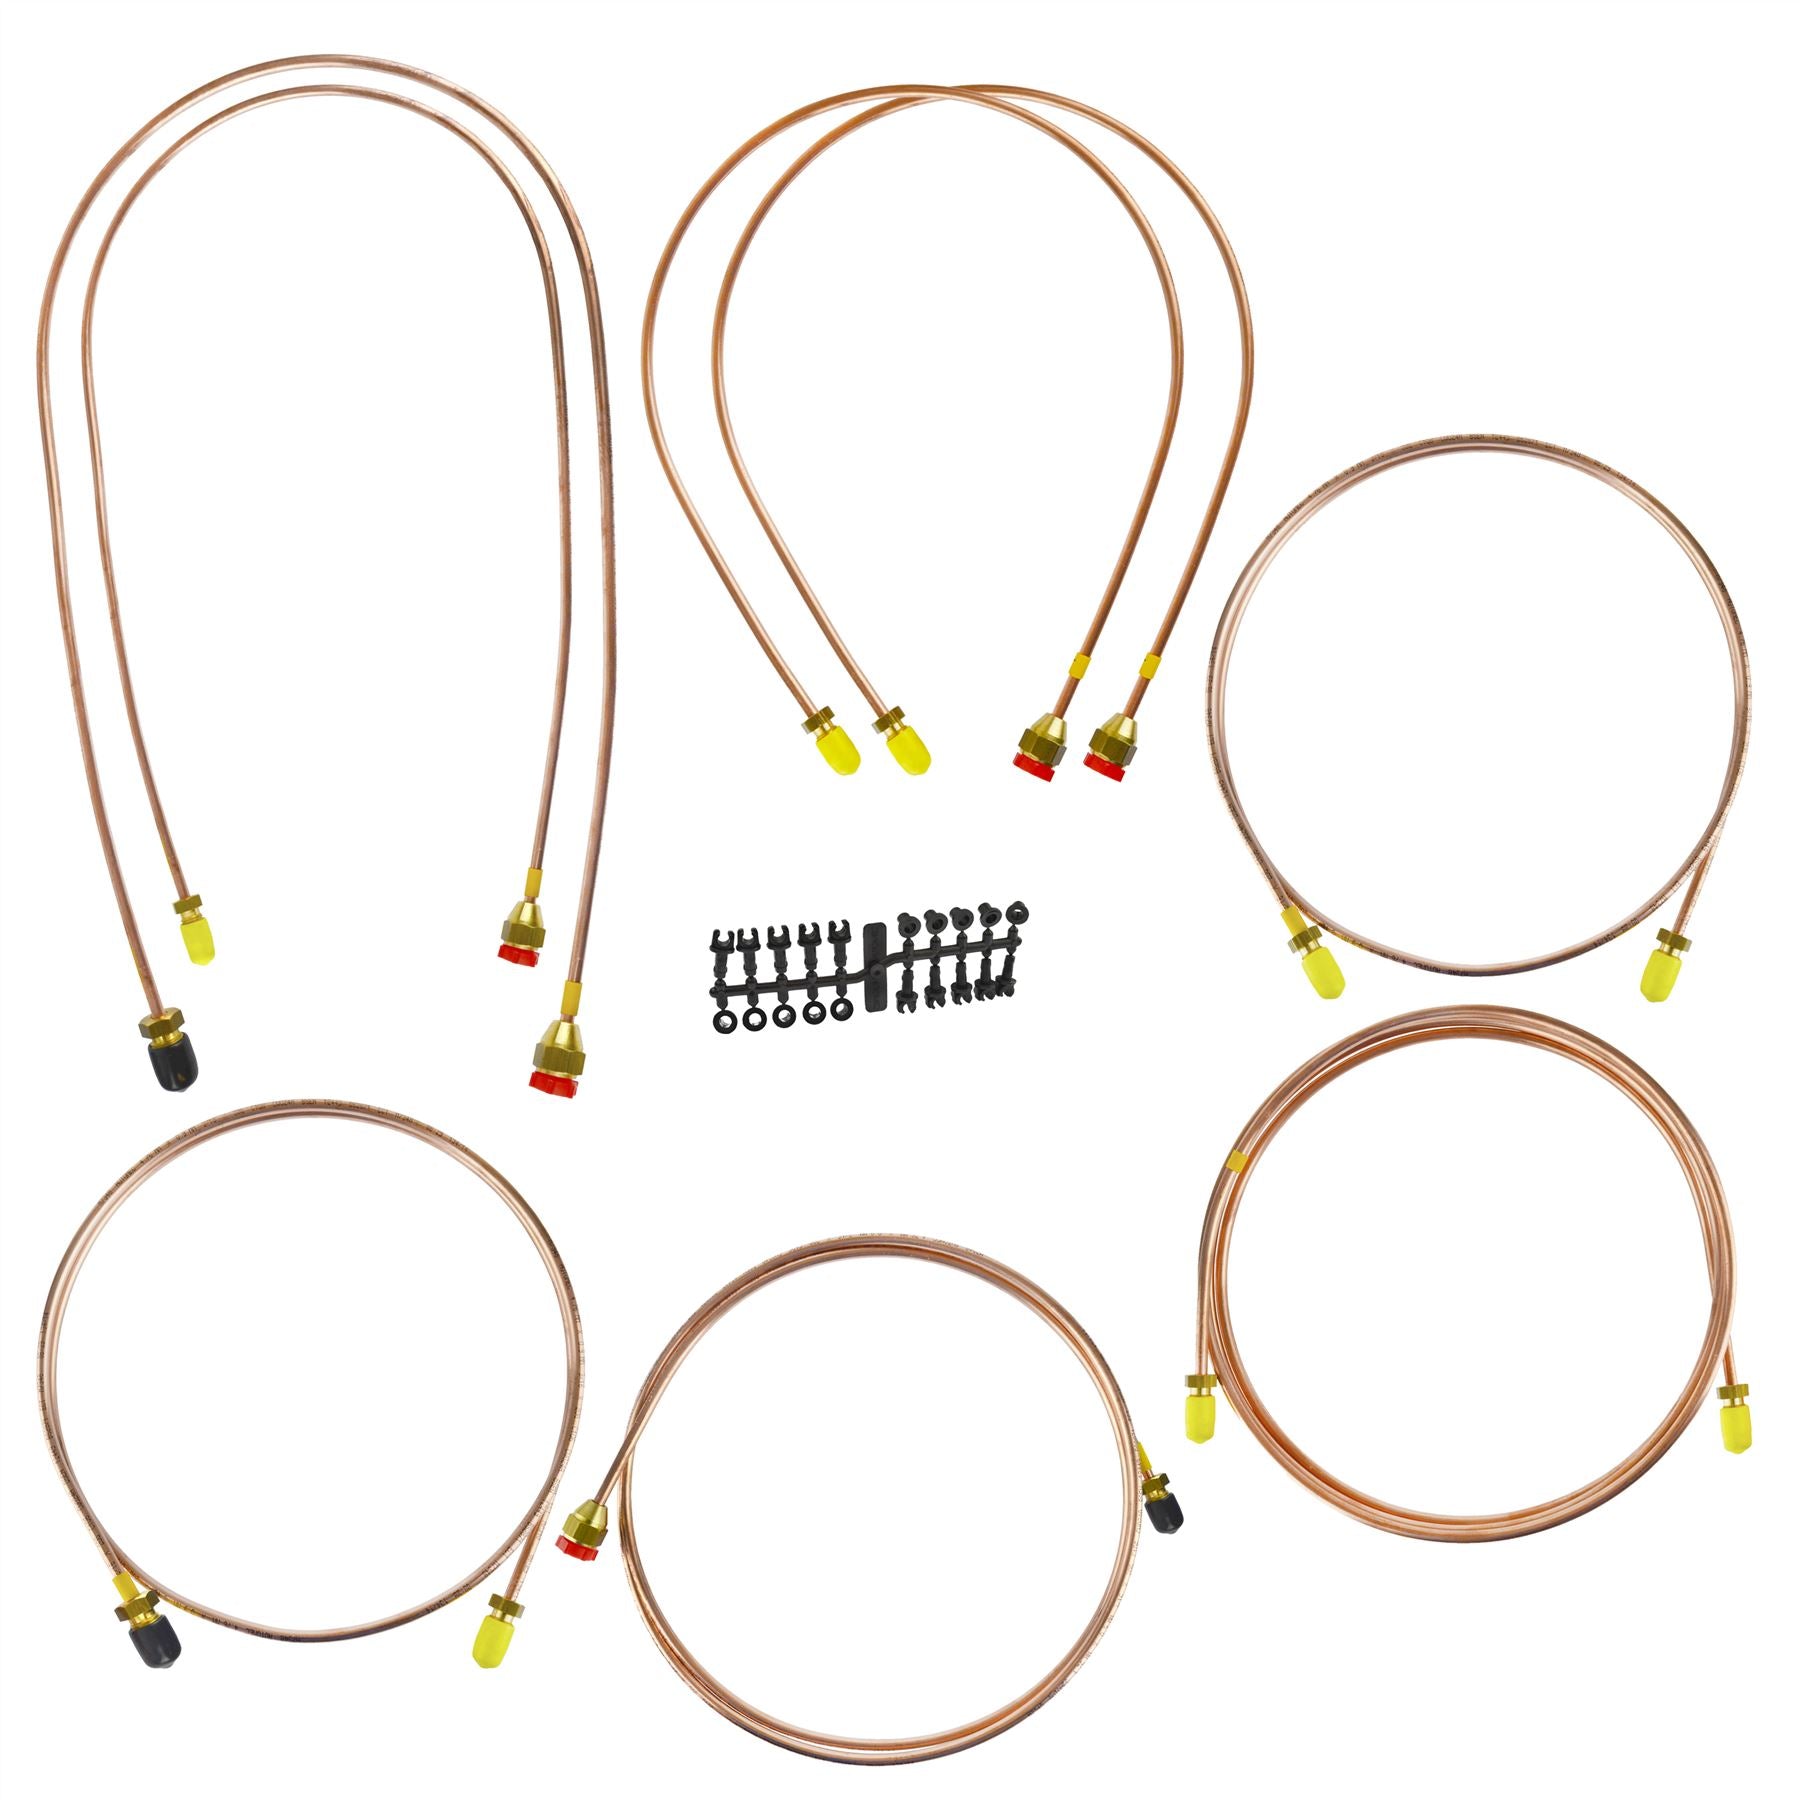 Full Copper & Brass Brake Line Fitting Set to fit Triumph Stag by Automec